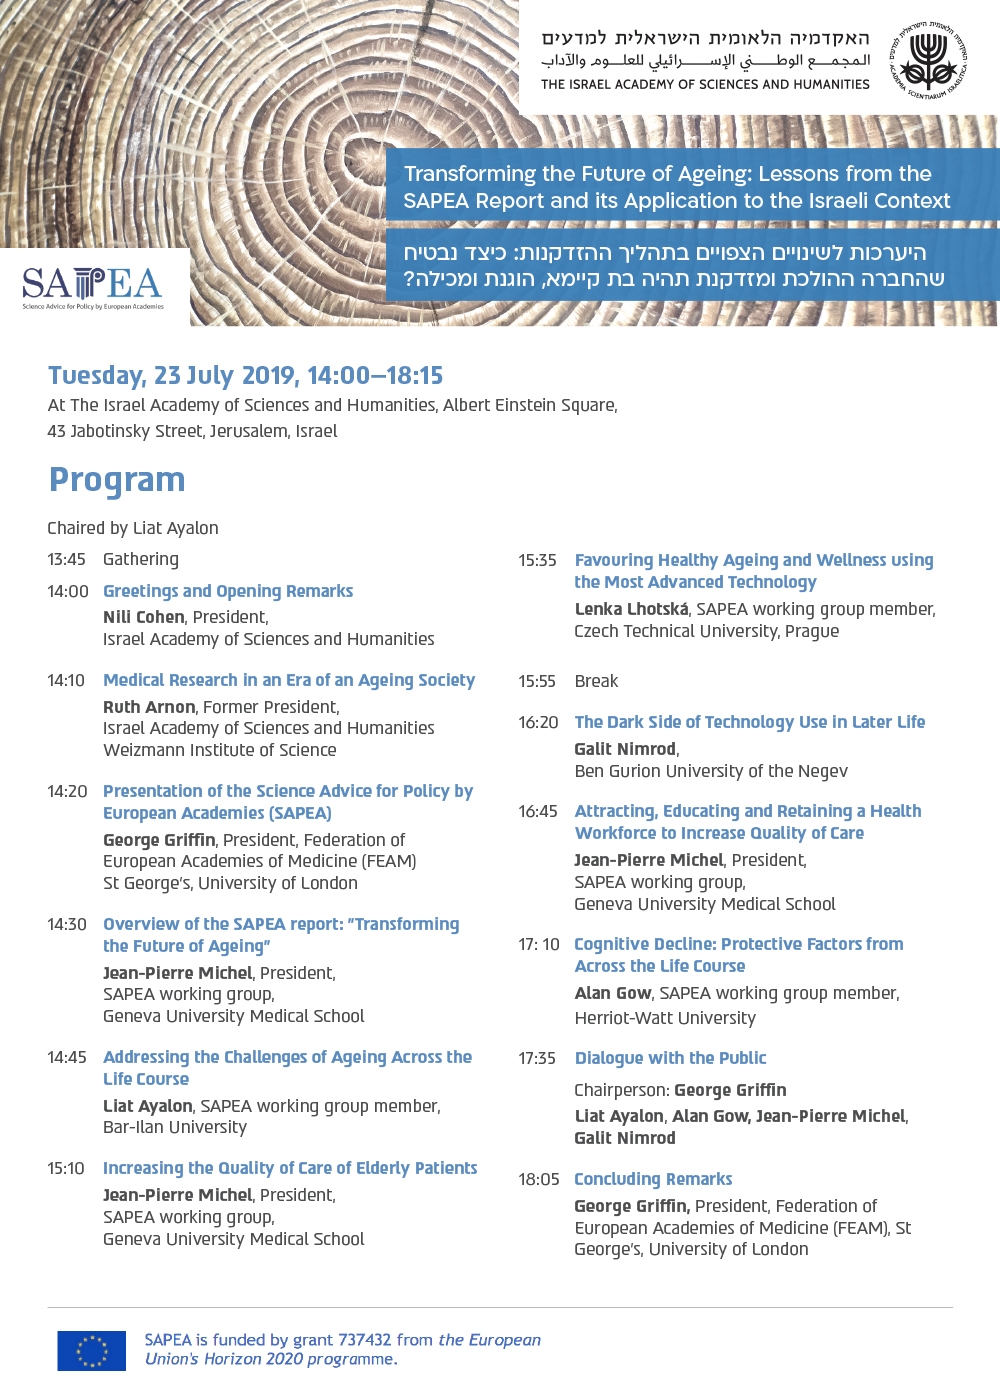 Transforming the Future of Ageing: Lessons from the SAPEA Report and it's Application to the Israeli Context